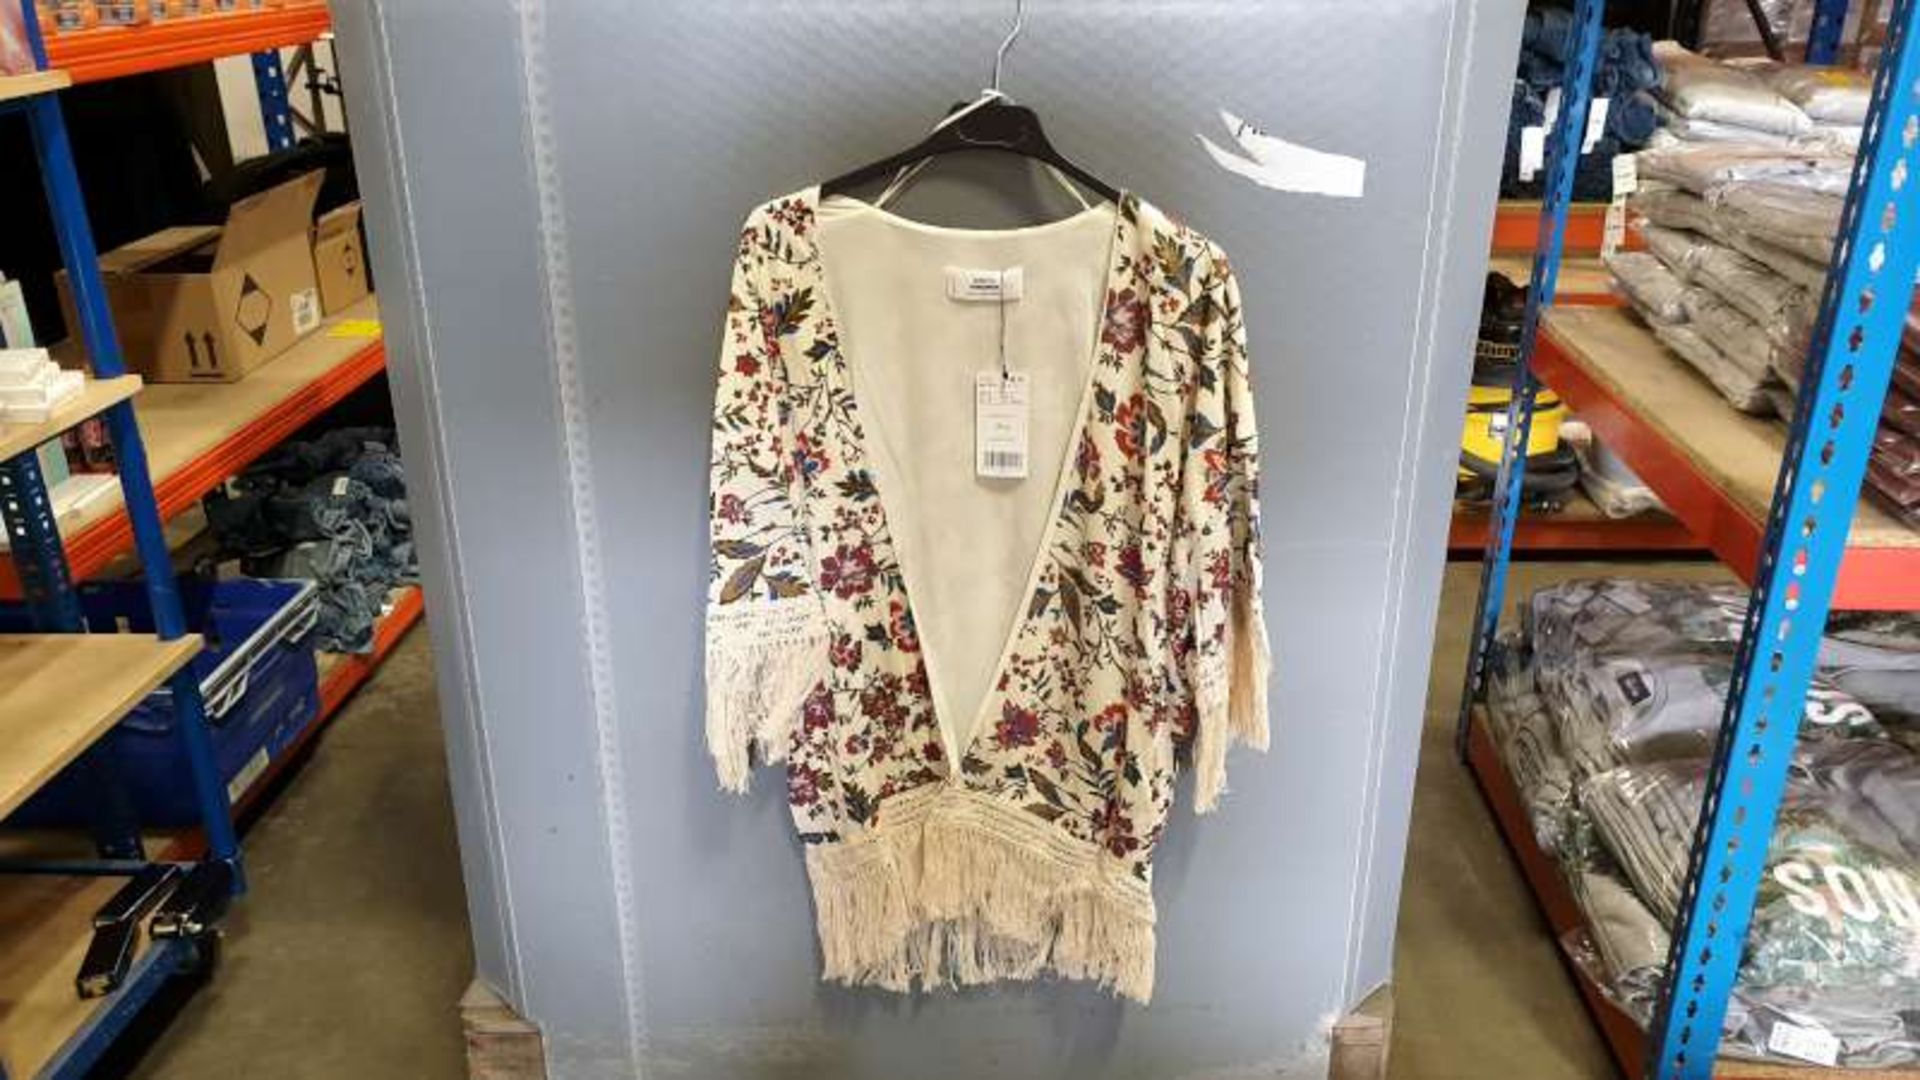 15 X BRAND NEW MONGO FLORAL PATTERN JACKETS SIZE SMALL RRP EACH ITEM 29.99 EUROS